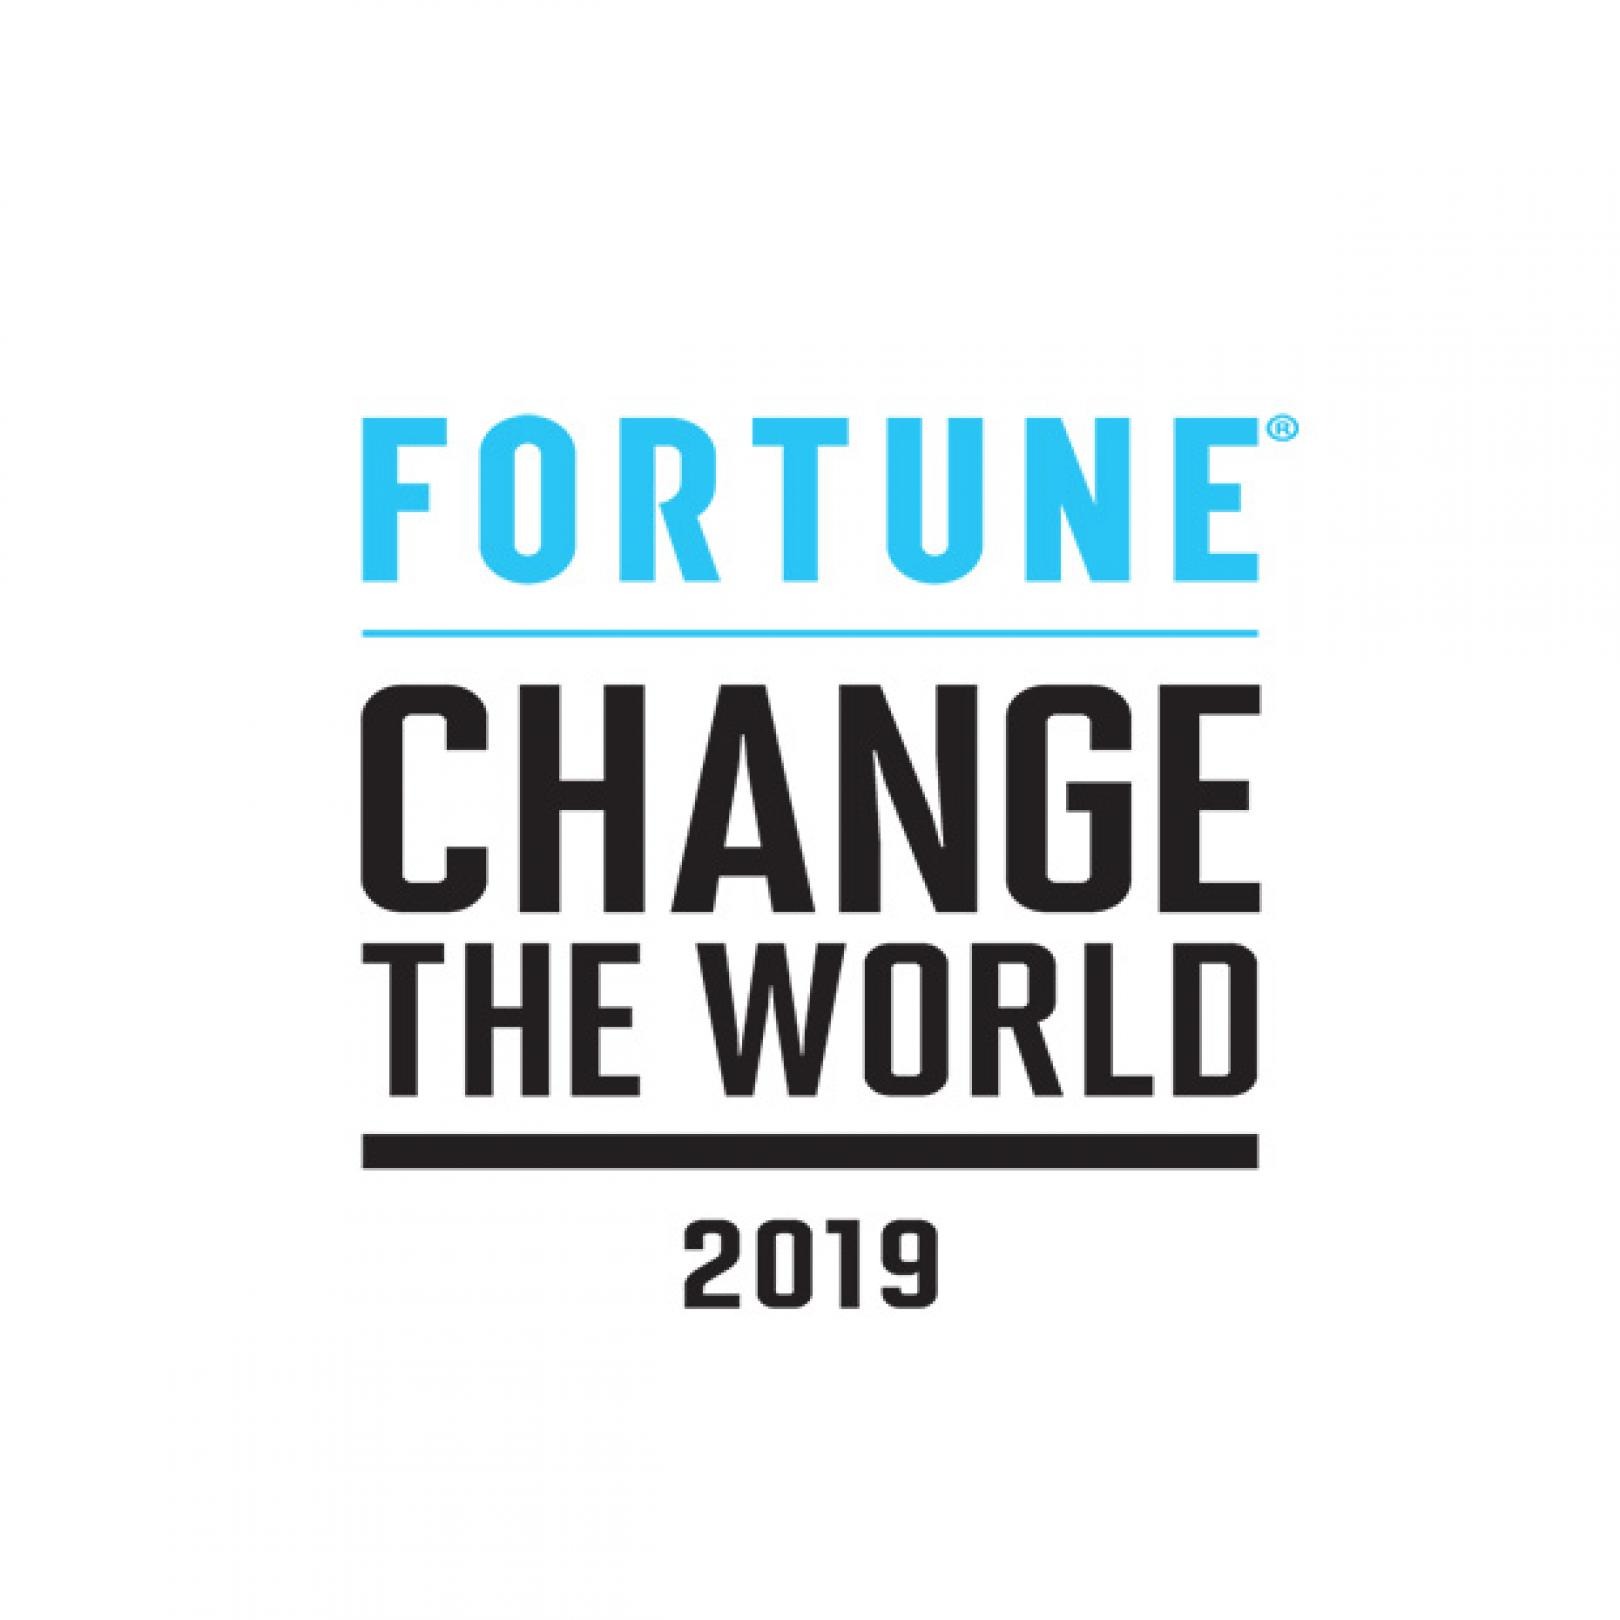 Fortune Change the World 2019